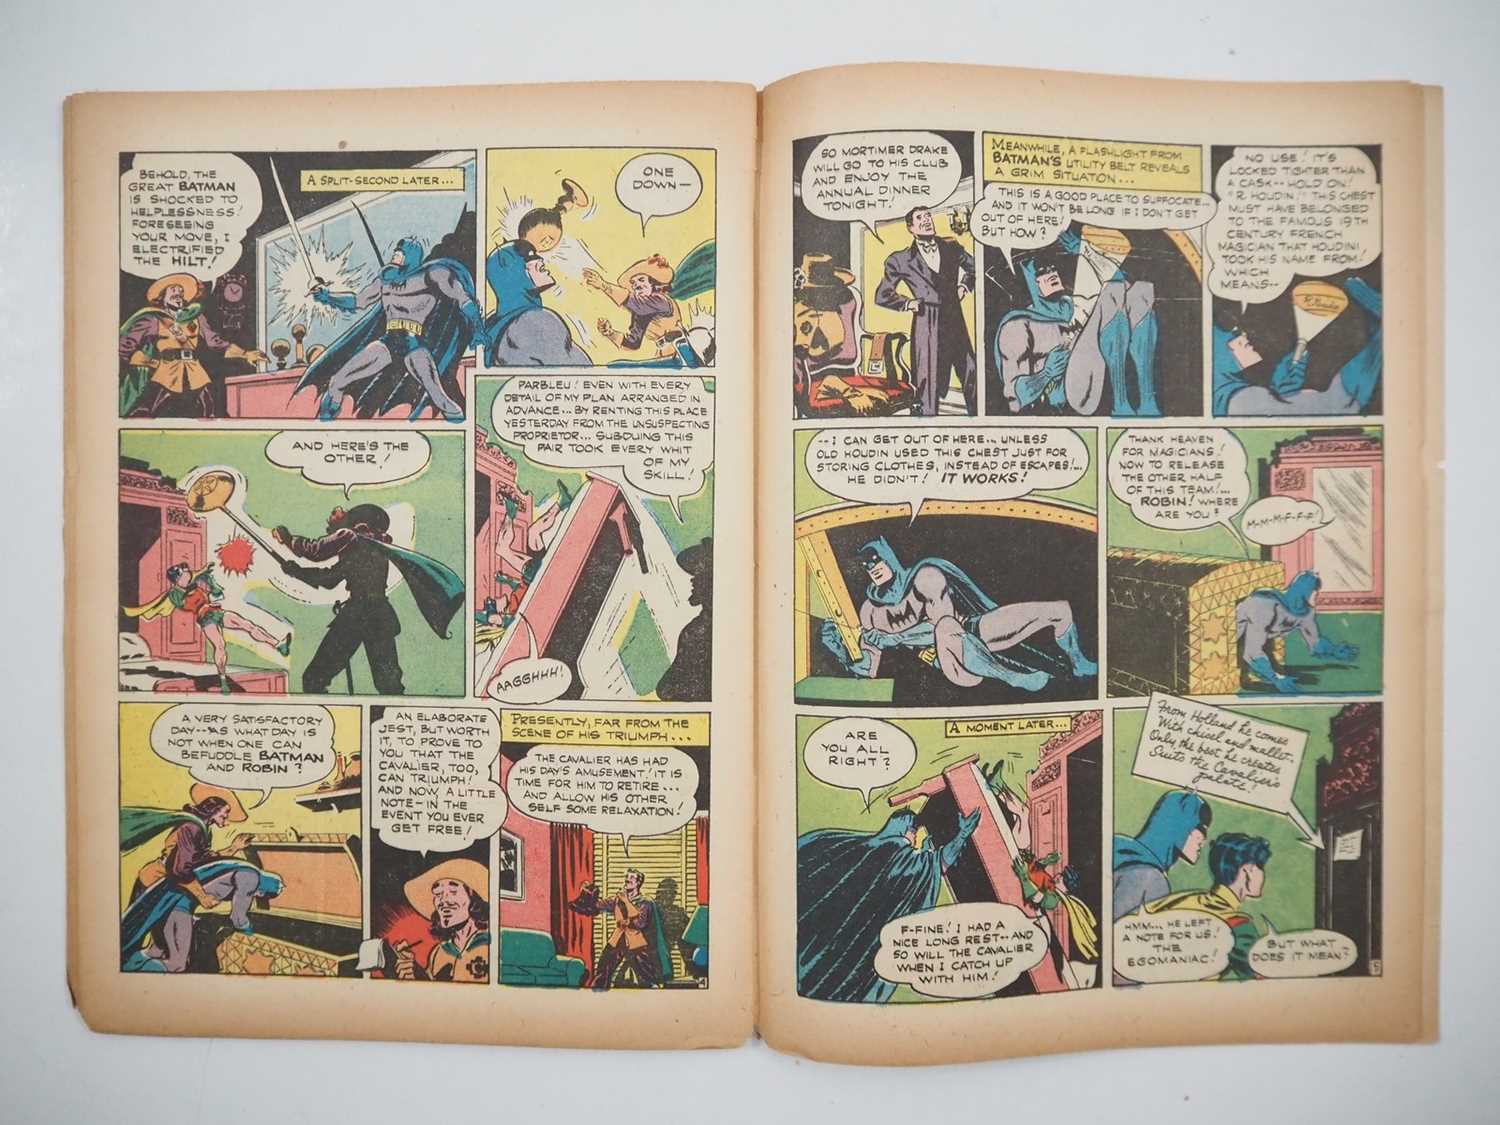 BATMAN #22 (1944 - DC) - First cover appearance and first solo story featuring Alfred - Dick - Image 27 of 37